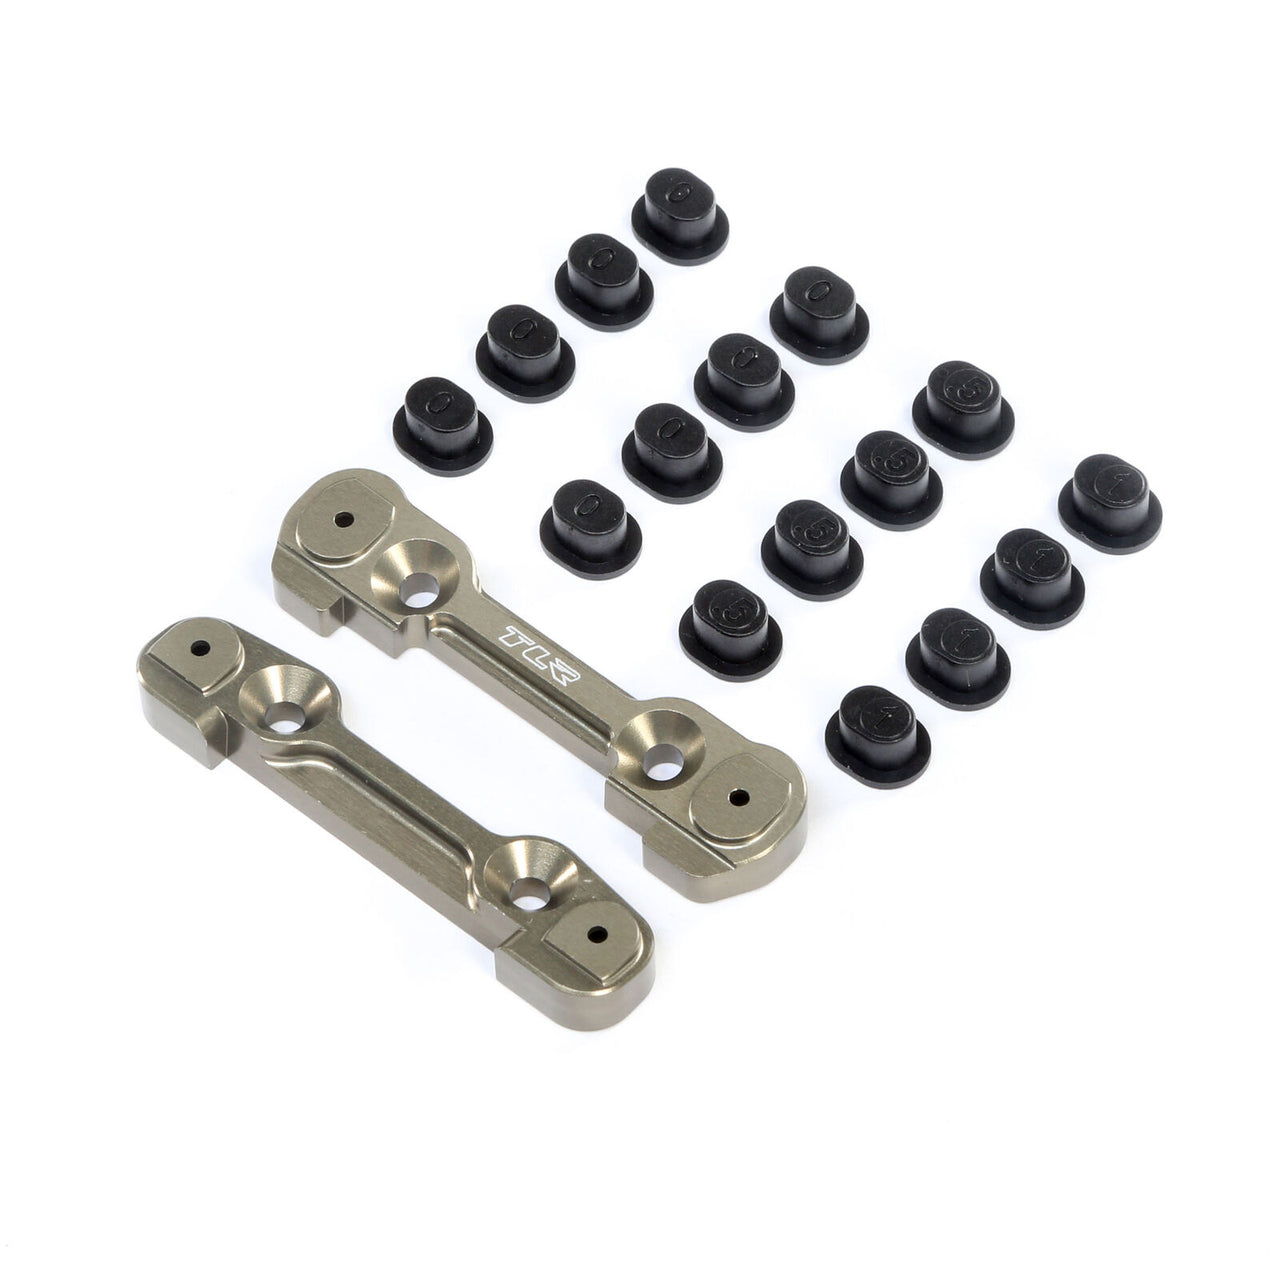 TLR244049 Adjustable Front Hinge Pin Brace with Inserts: 8X, 8XE